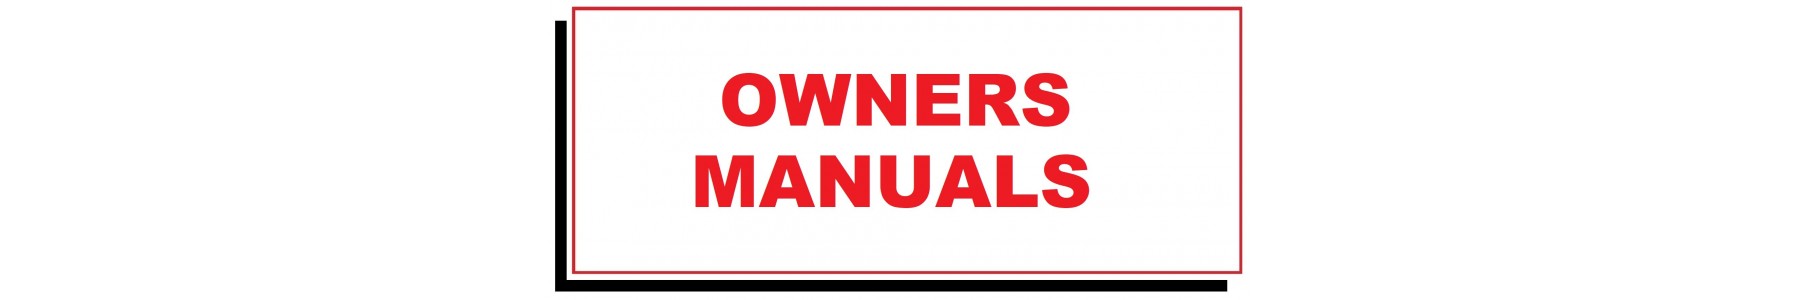 OWNERS MANUALS